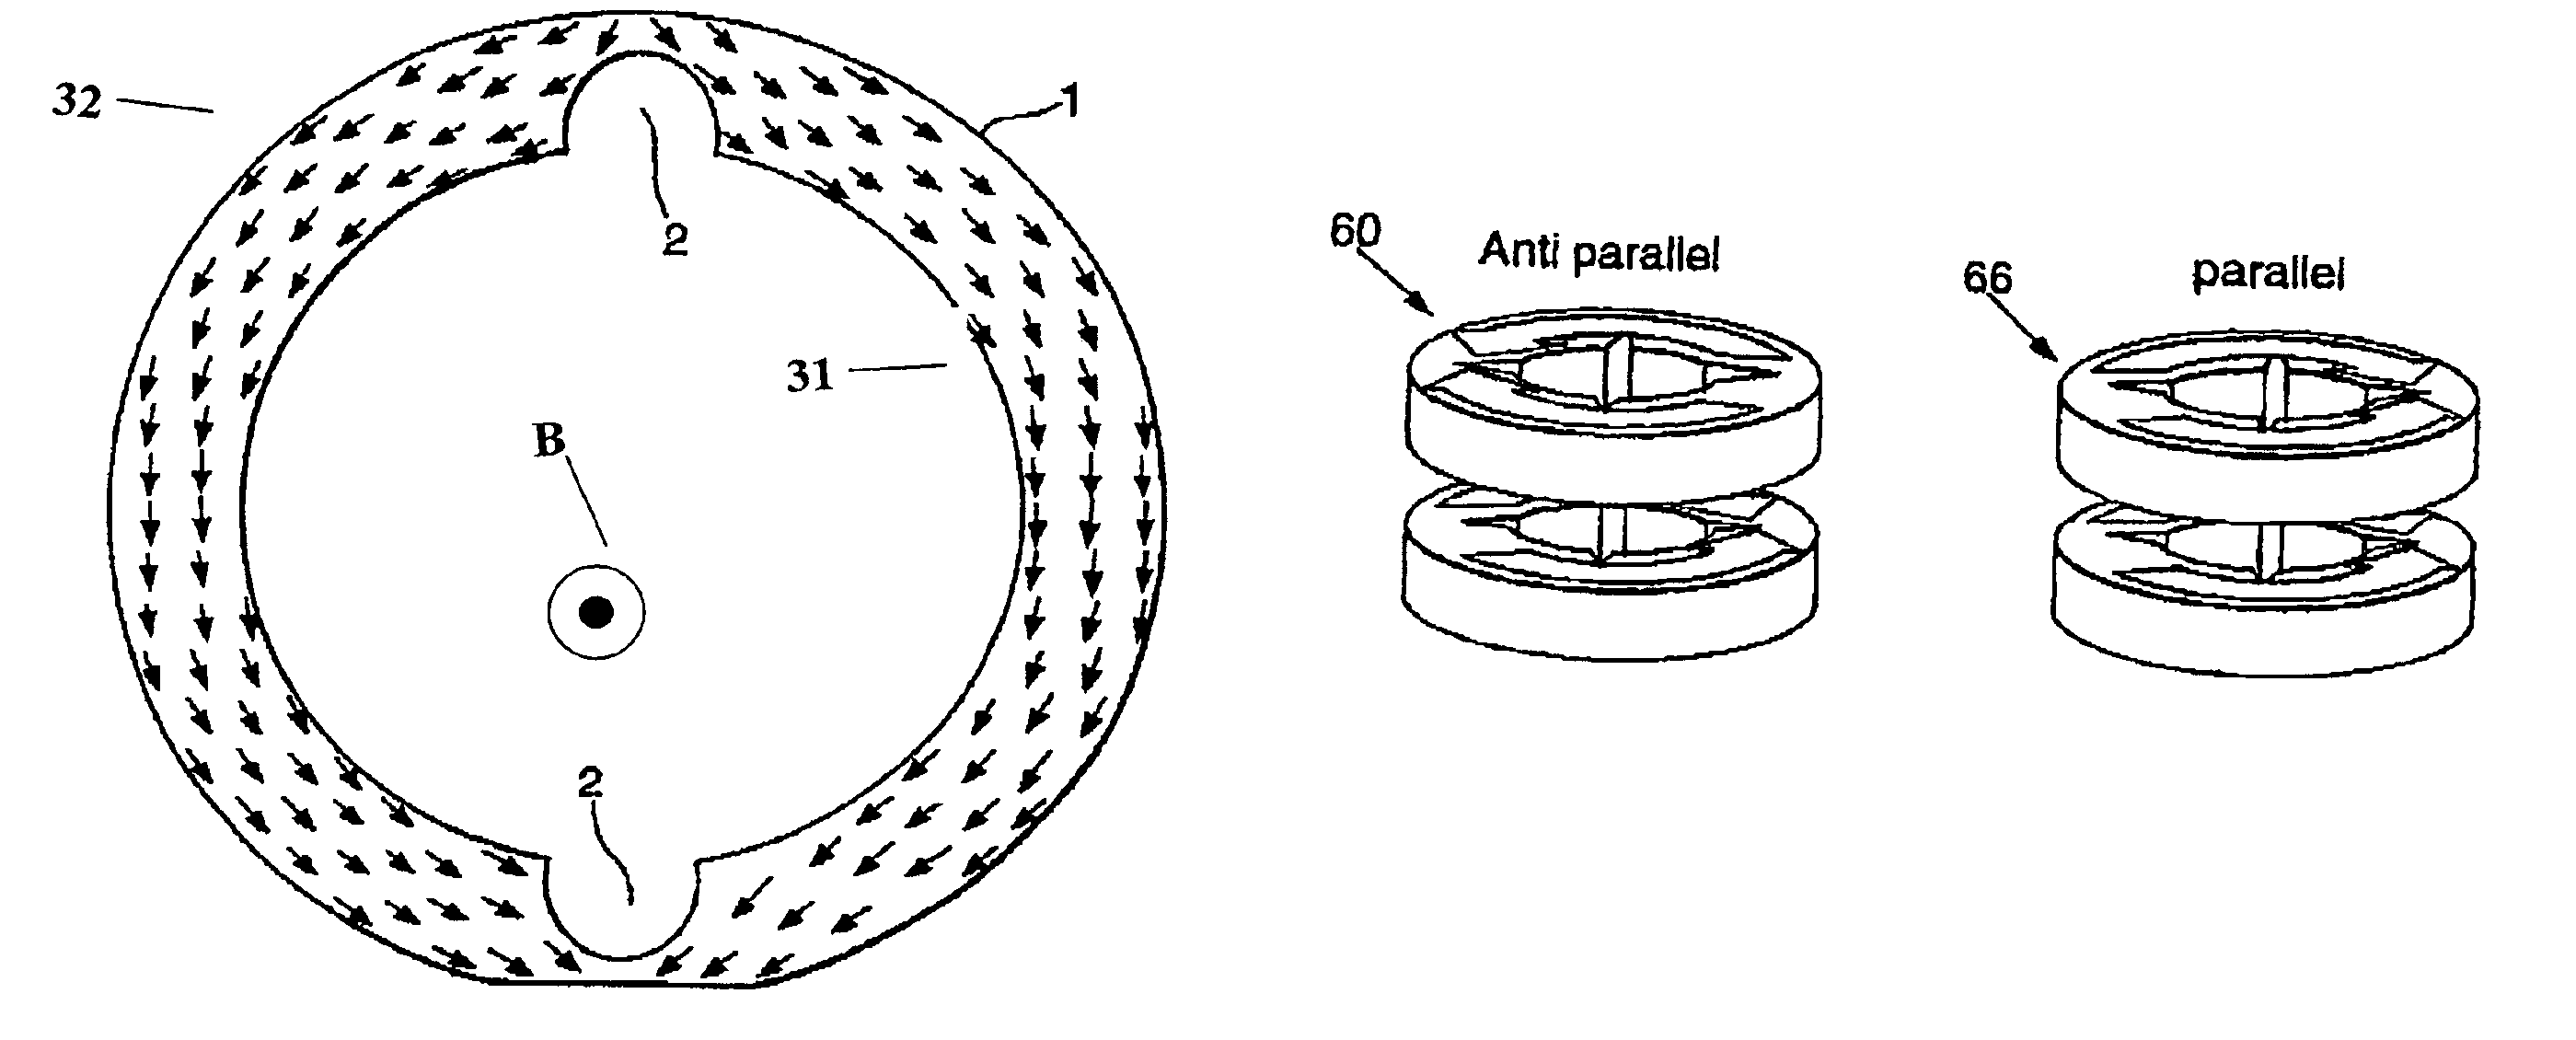 Magnetic element with switchable domain structure